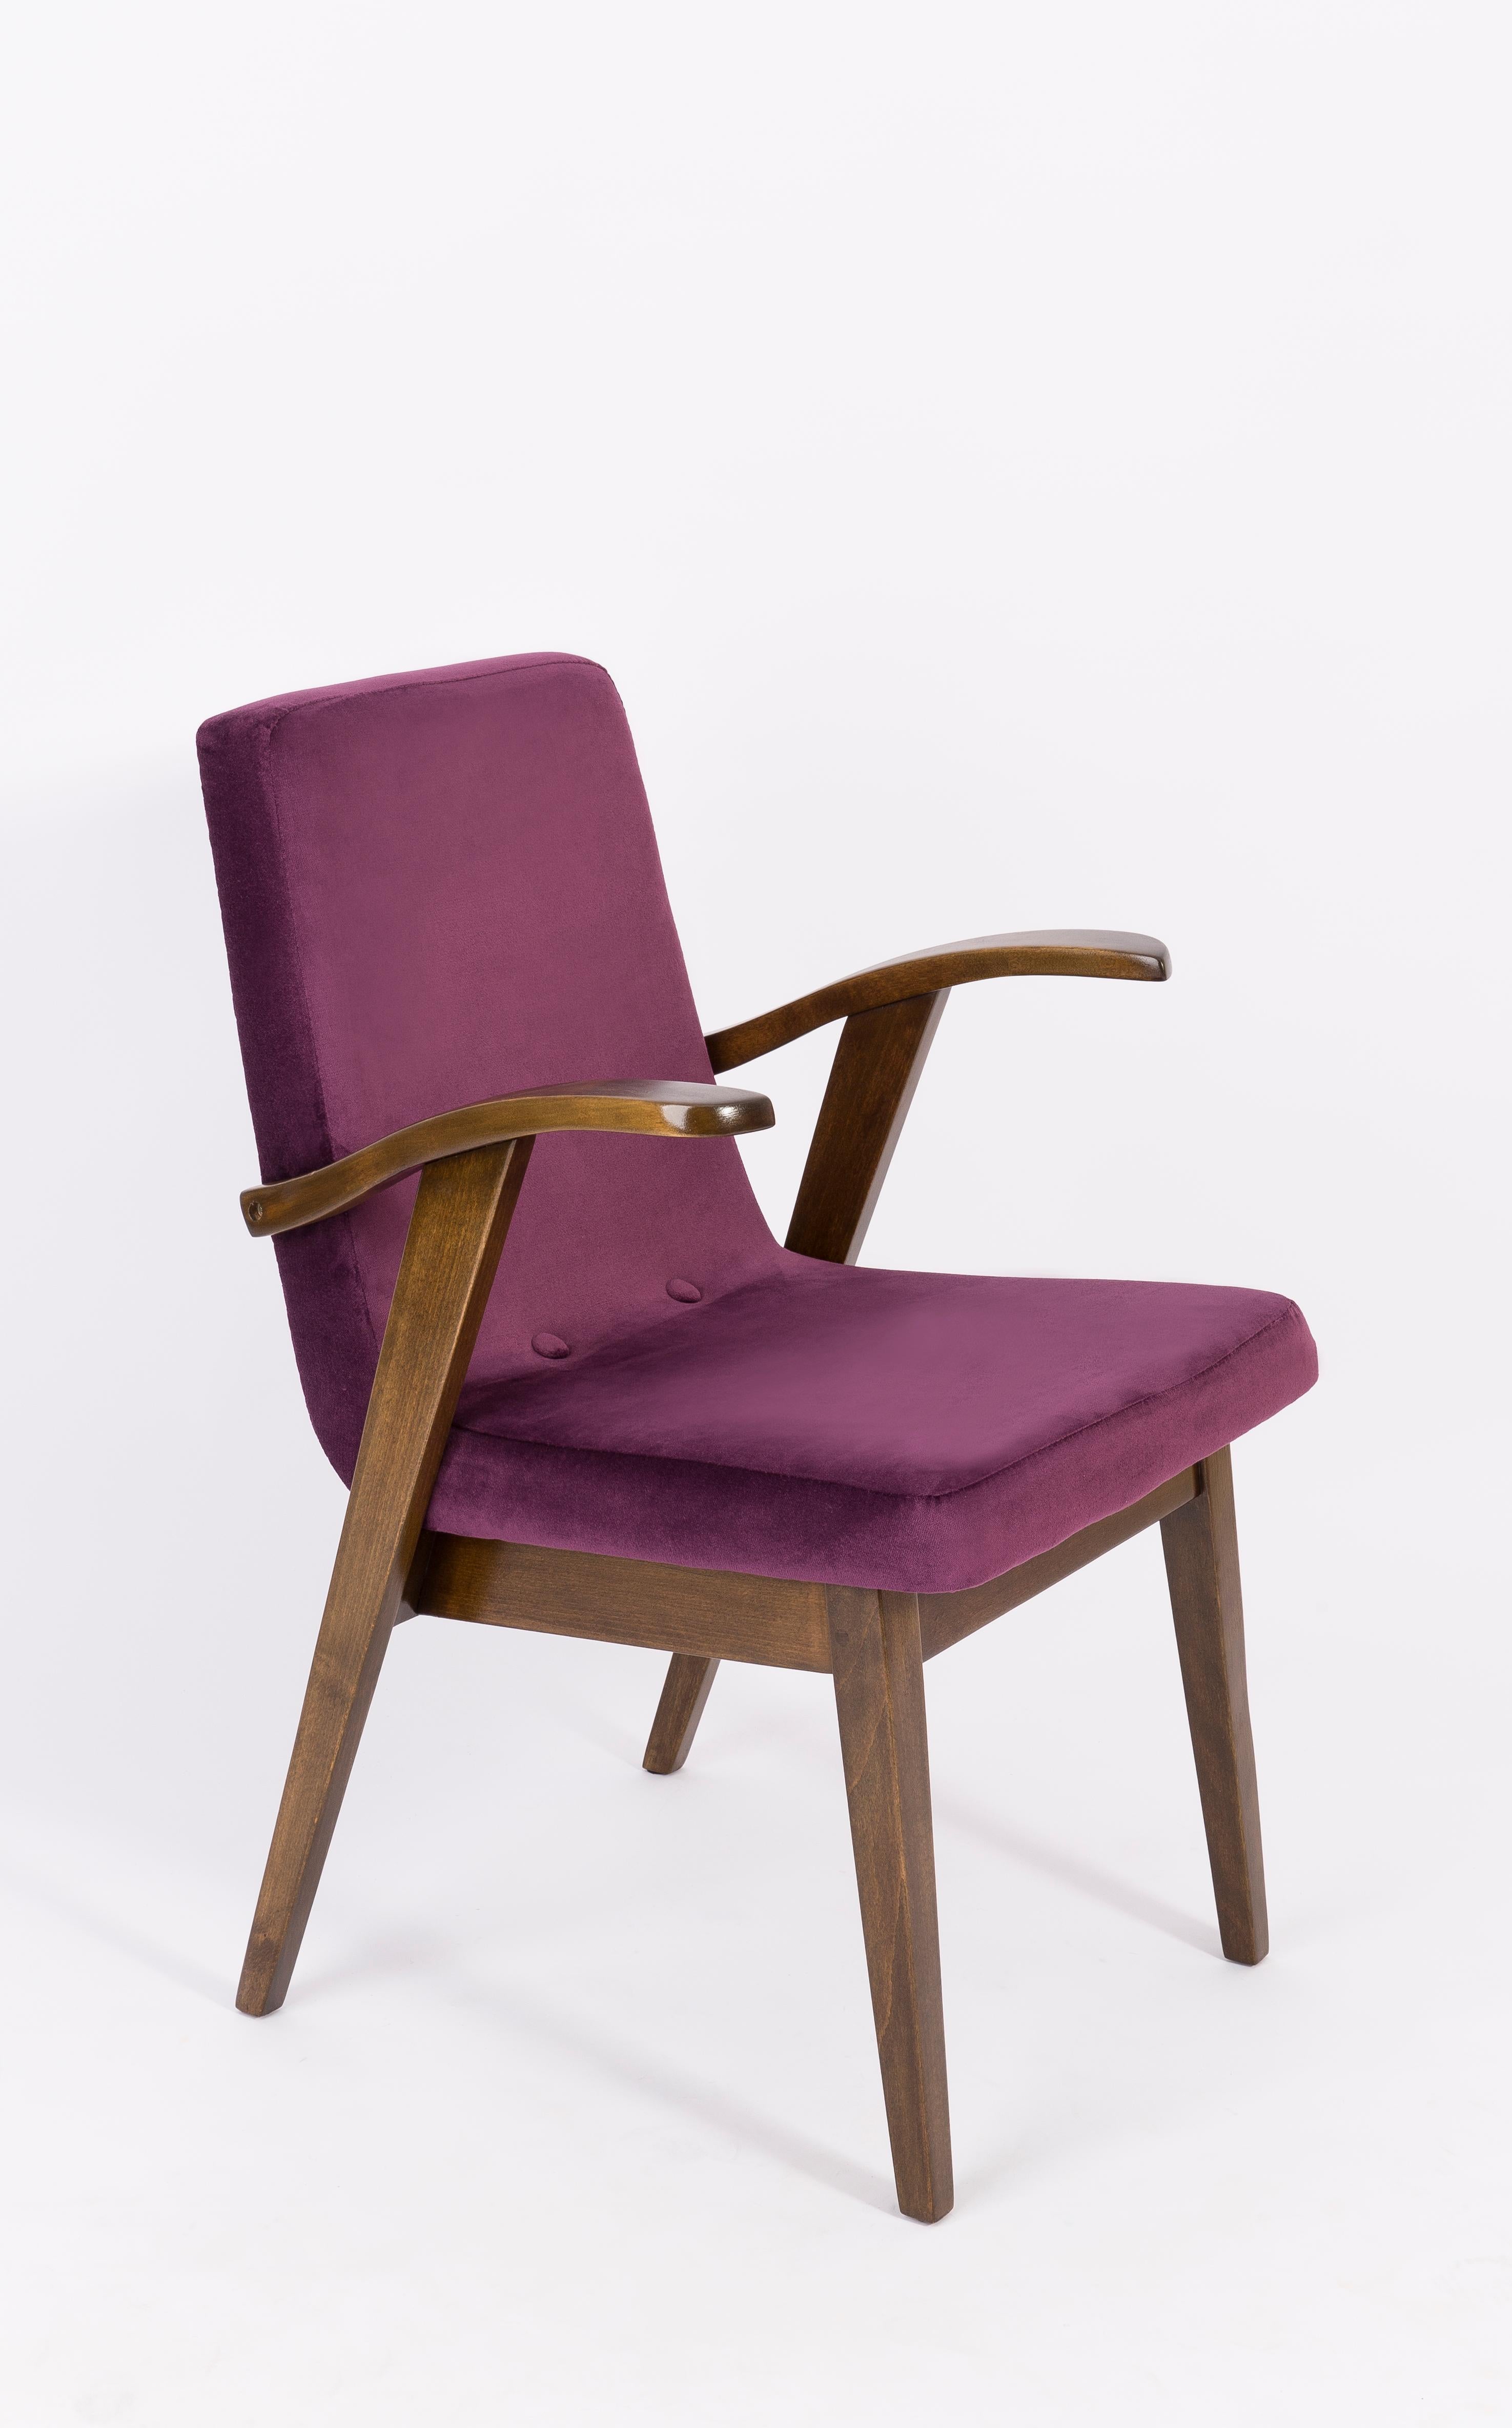 Armchairs designed by Mieczyslaw Puchala in a Classic edition. Dark wood combined with a plum violet fabric gives it elegance and nobility. The chair has undergone a full carpentry and upholstery renovation. The wood is in excellent condition,